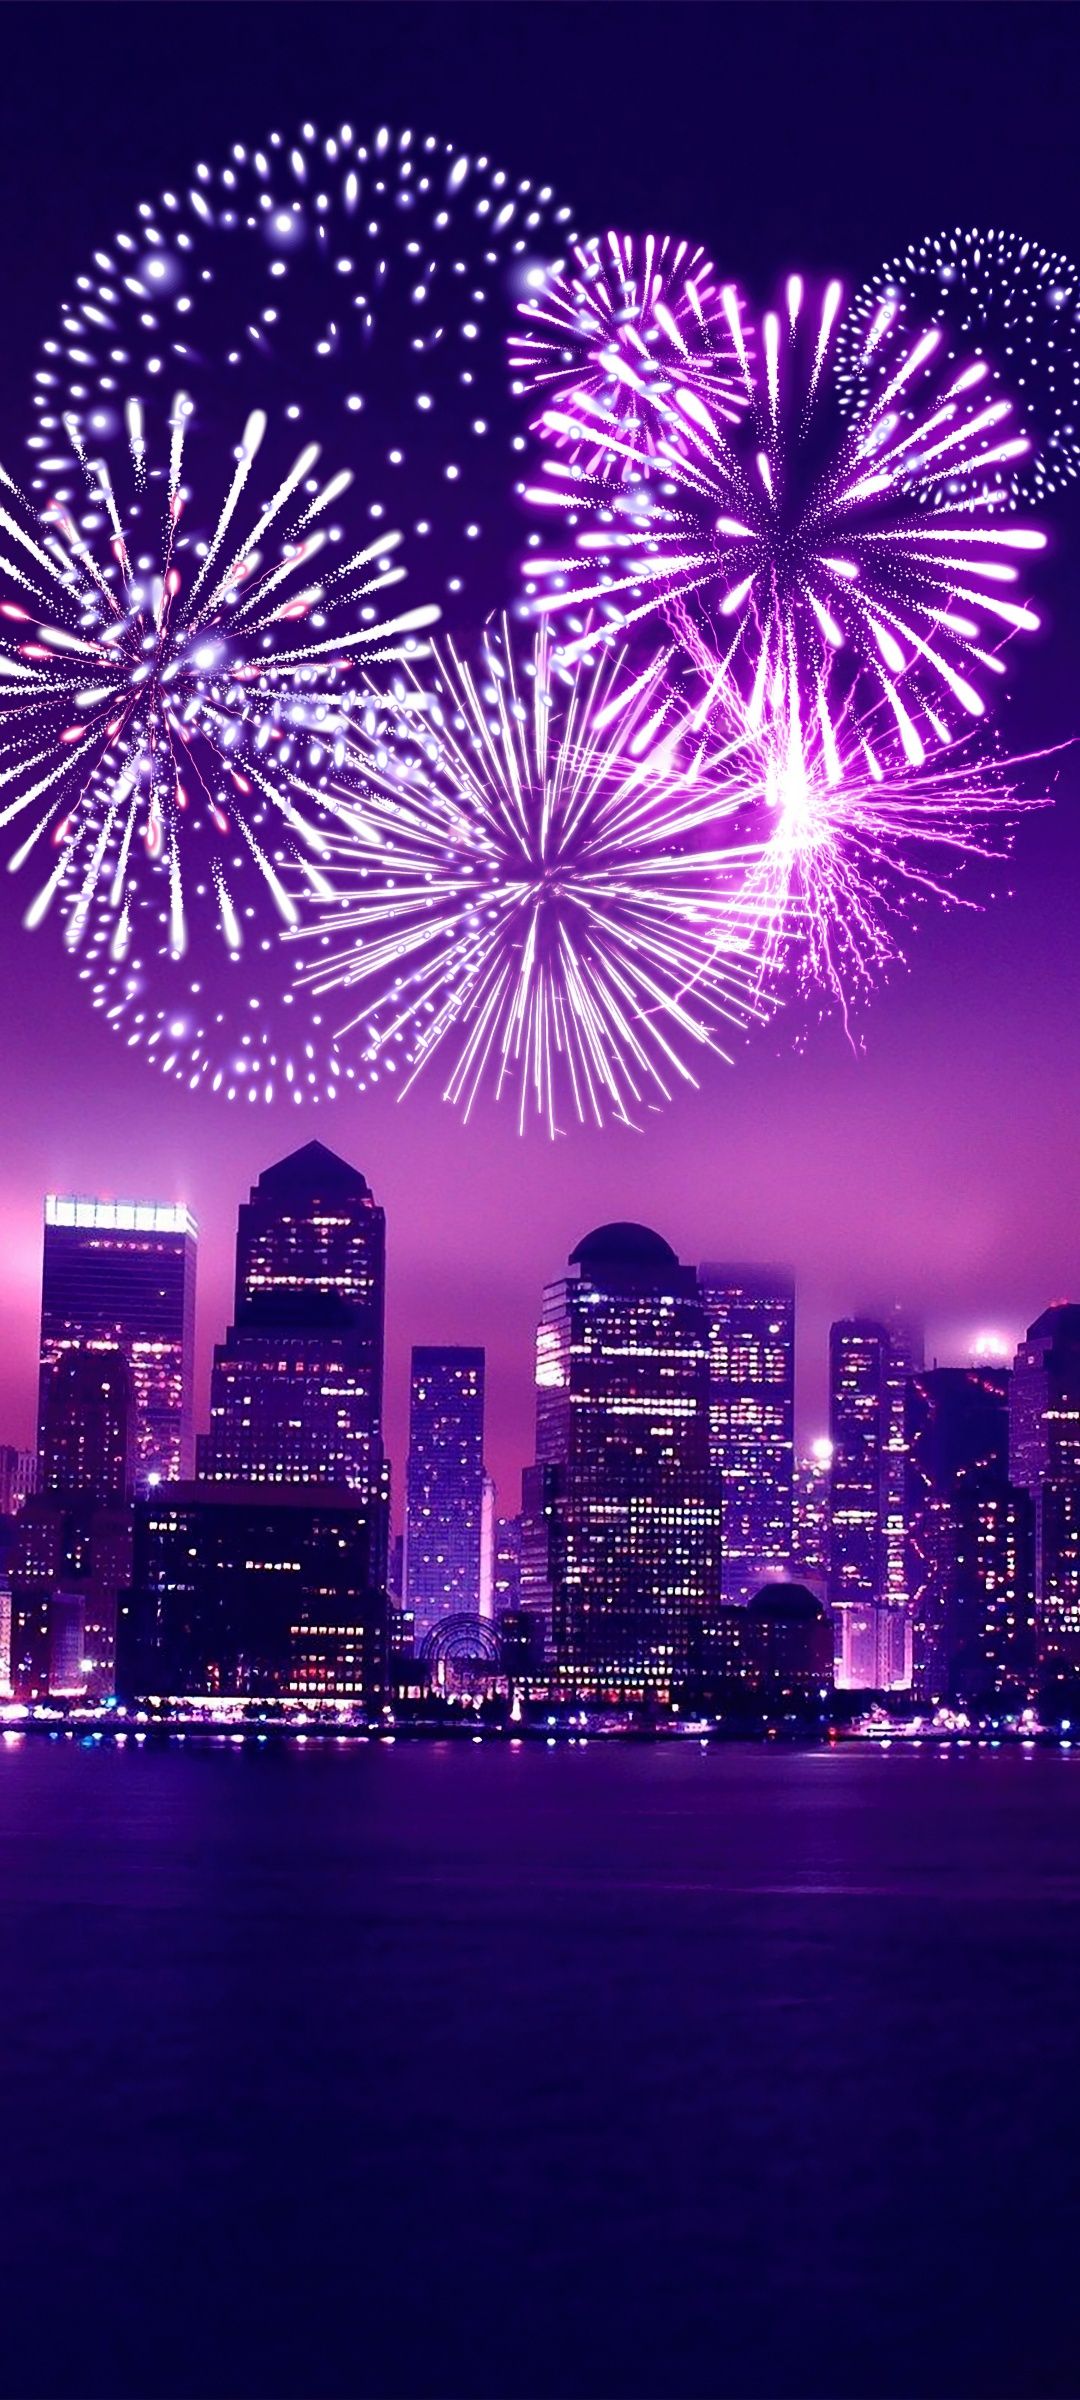 A city skyline with fireworks in the background - New Year